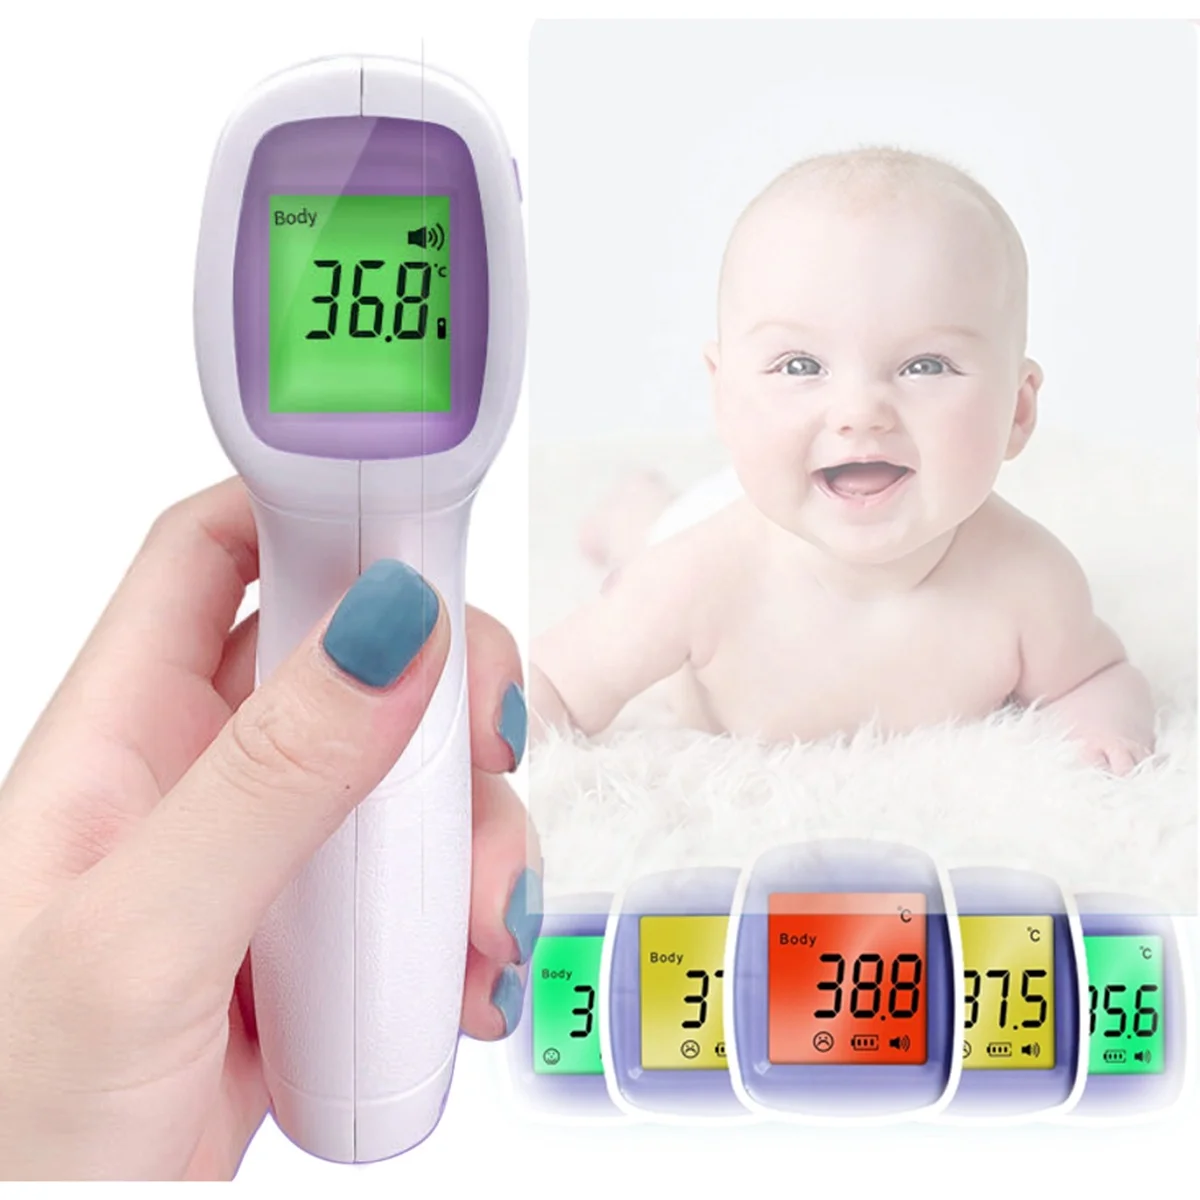 

Smart Sensor Infrared Thermometer High Accuracy Digital Non Contact Rohs Infrared Thermometer Baby Digital Infrared Thermometer